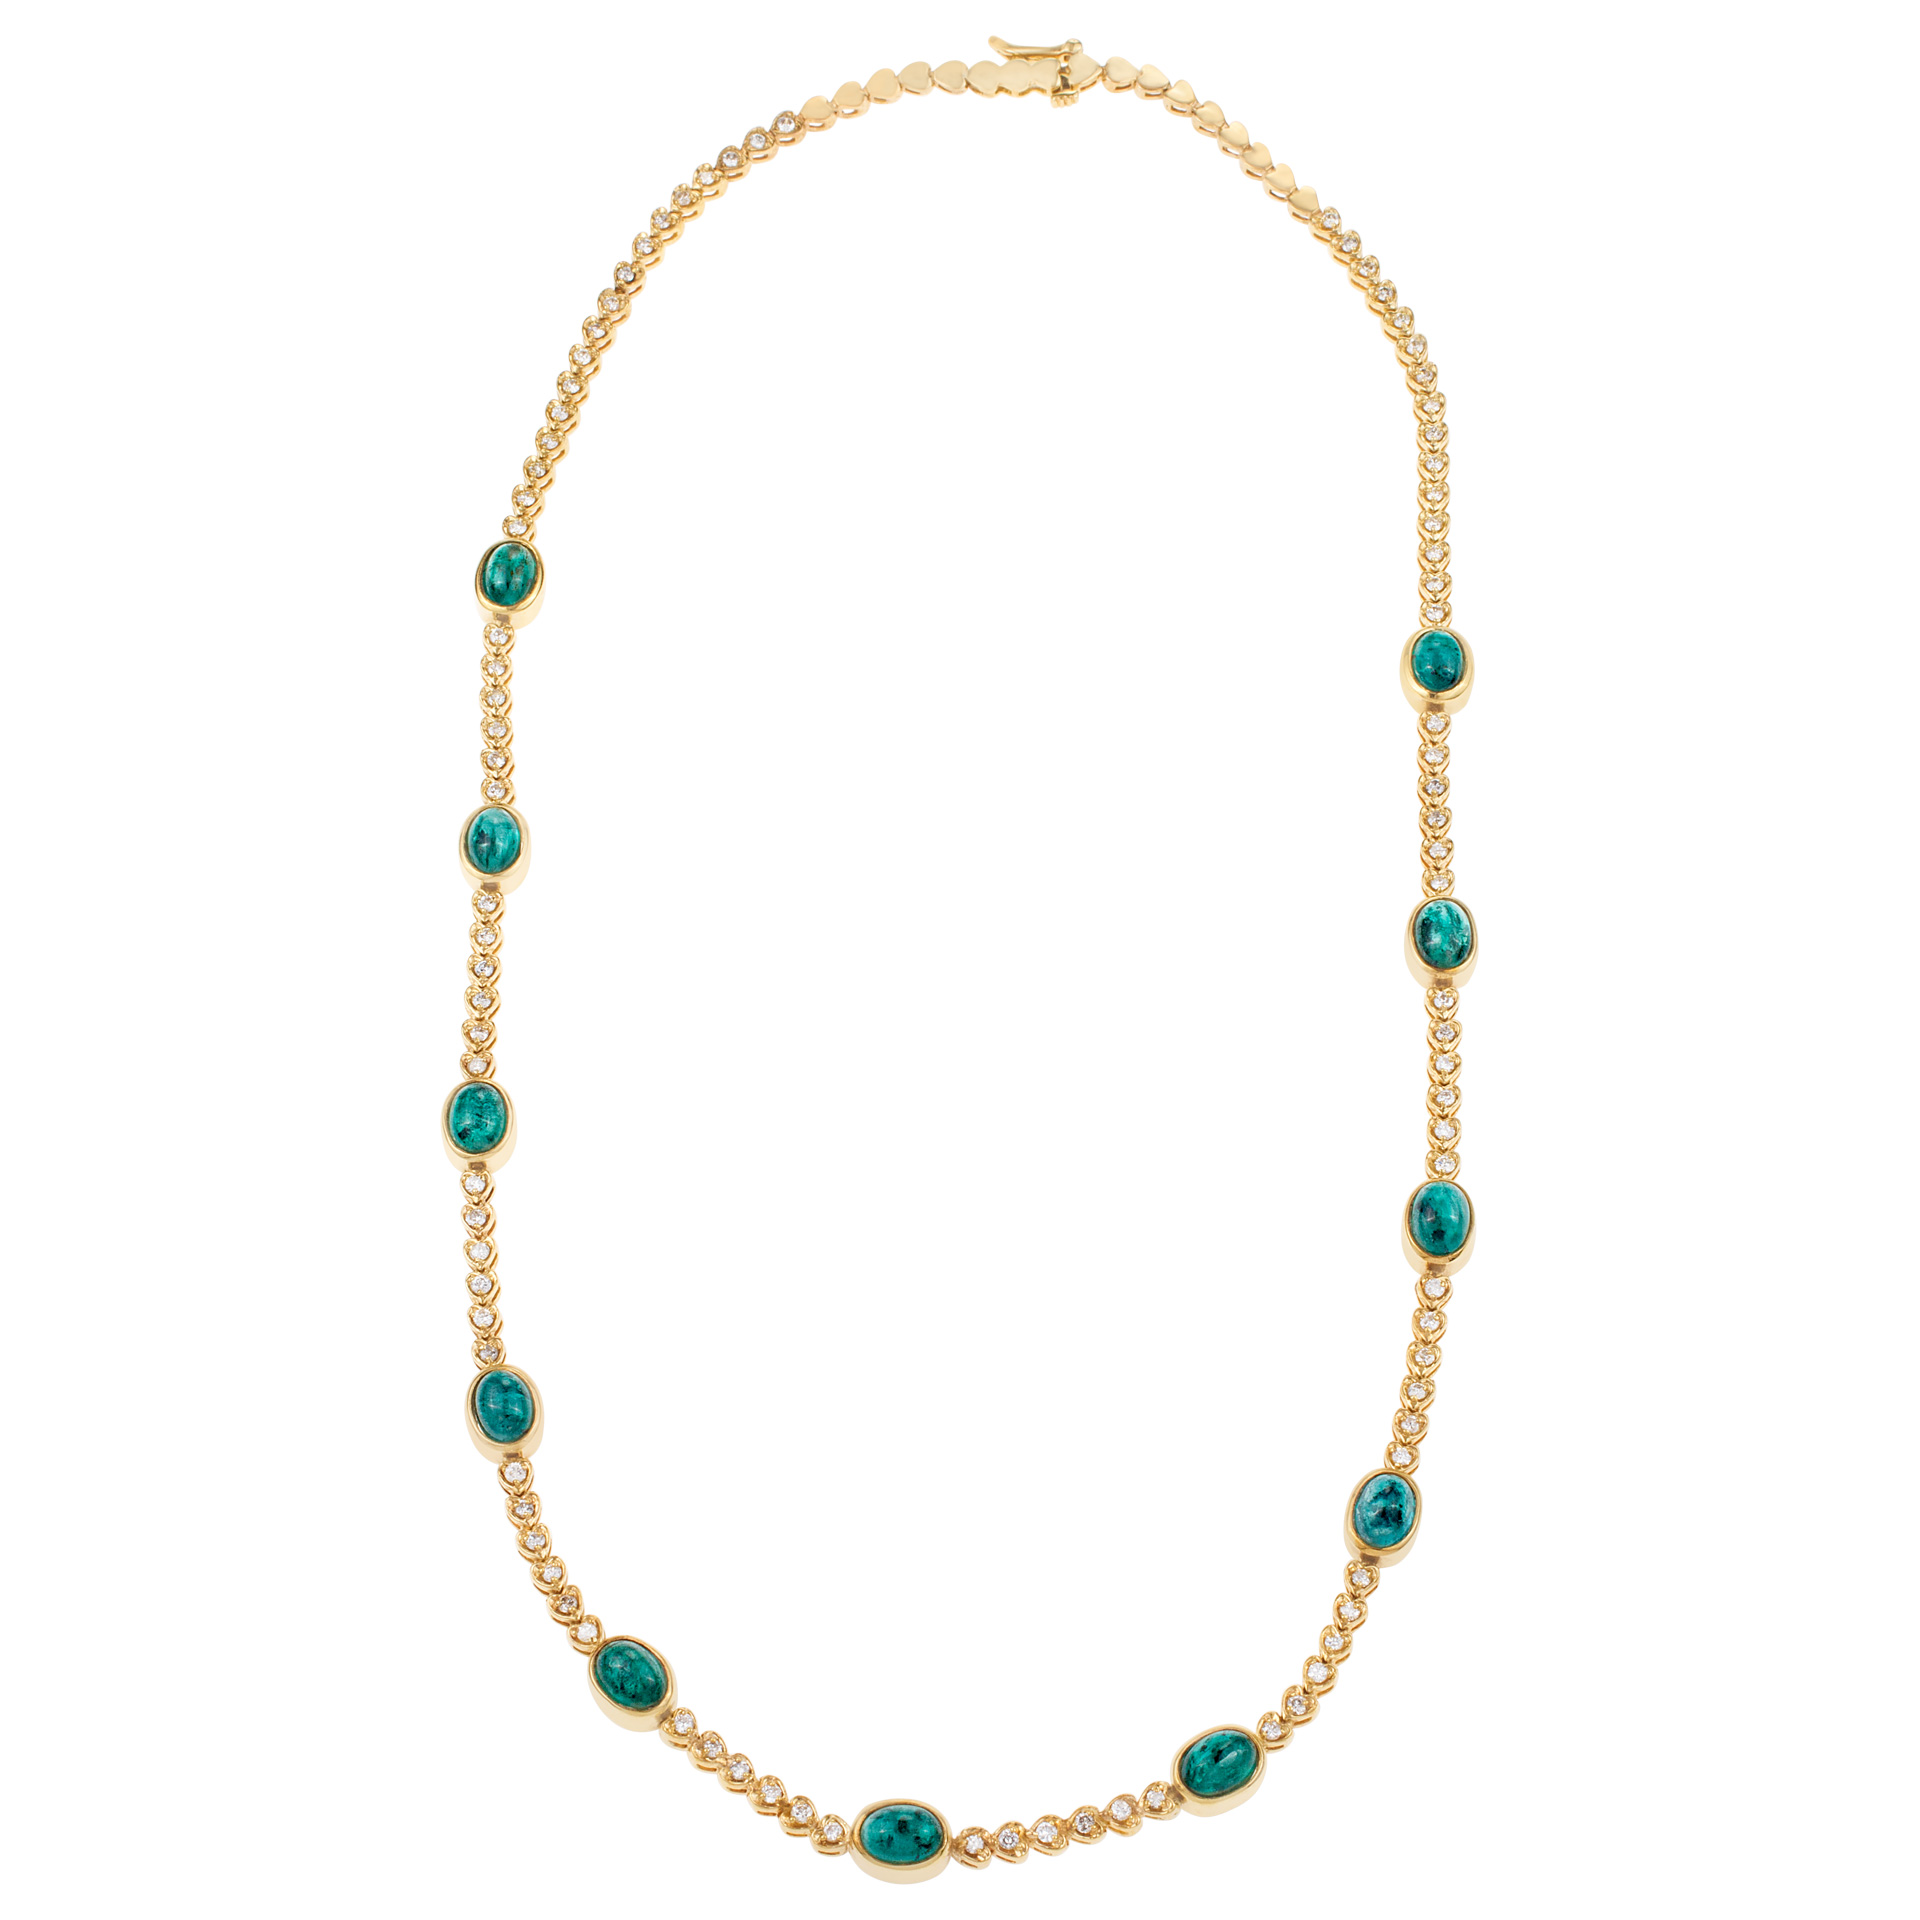 Cabachon emerald & diamond heart link necklace in 14k image 1